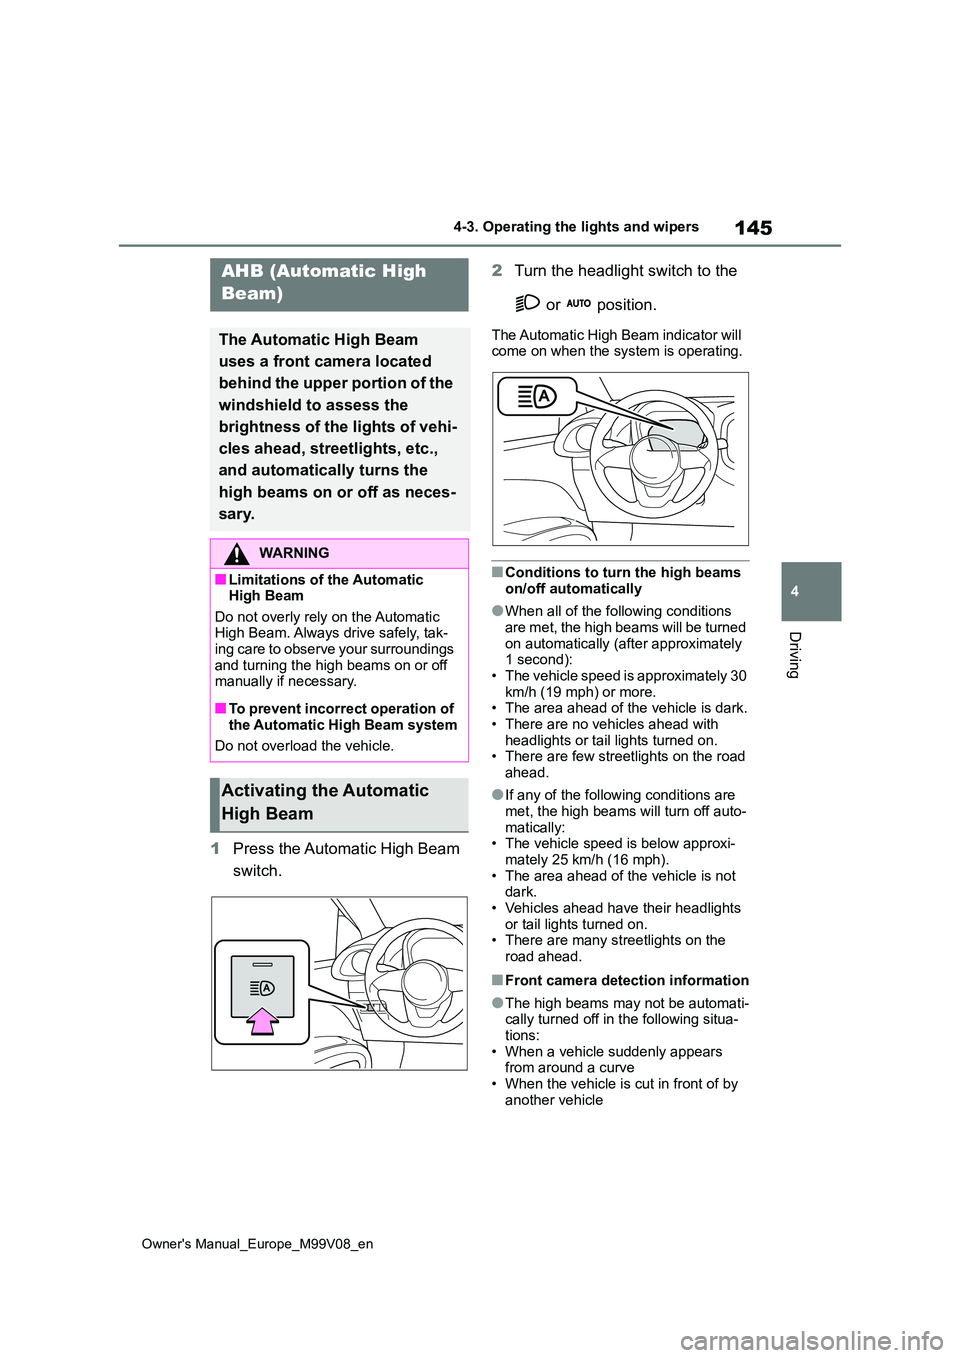 TOYOTA AYGO X 2022  Owners Manual (in English) 145
4
Owner's Manual_Europe_M99V08_en
4-3. Operating the lights and wipers
Driving
1Press the Automatic High Beam  
switch. 
2 Turn the headlight switch to the  
 or   position.
The Automatic High